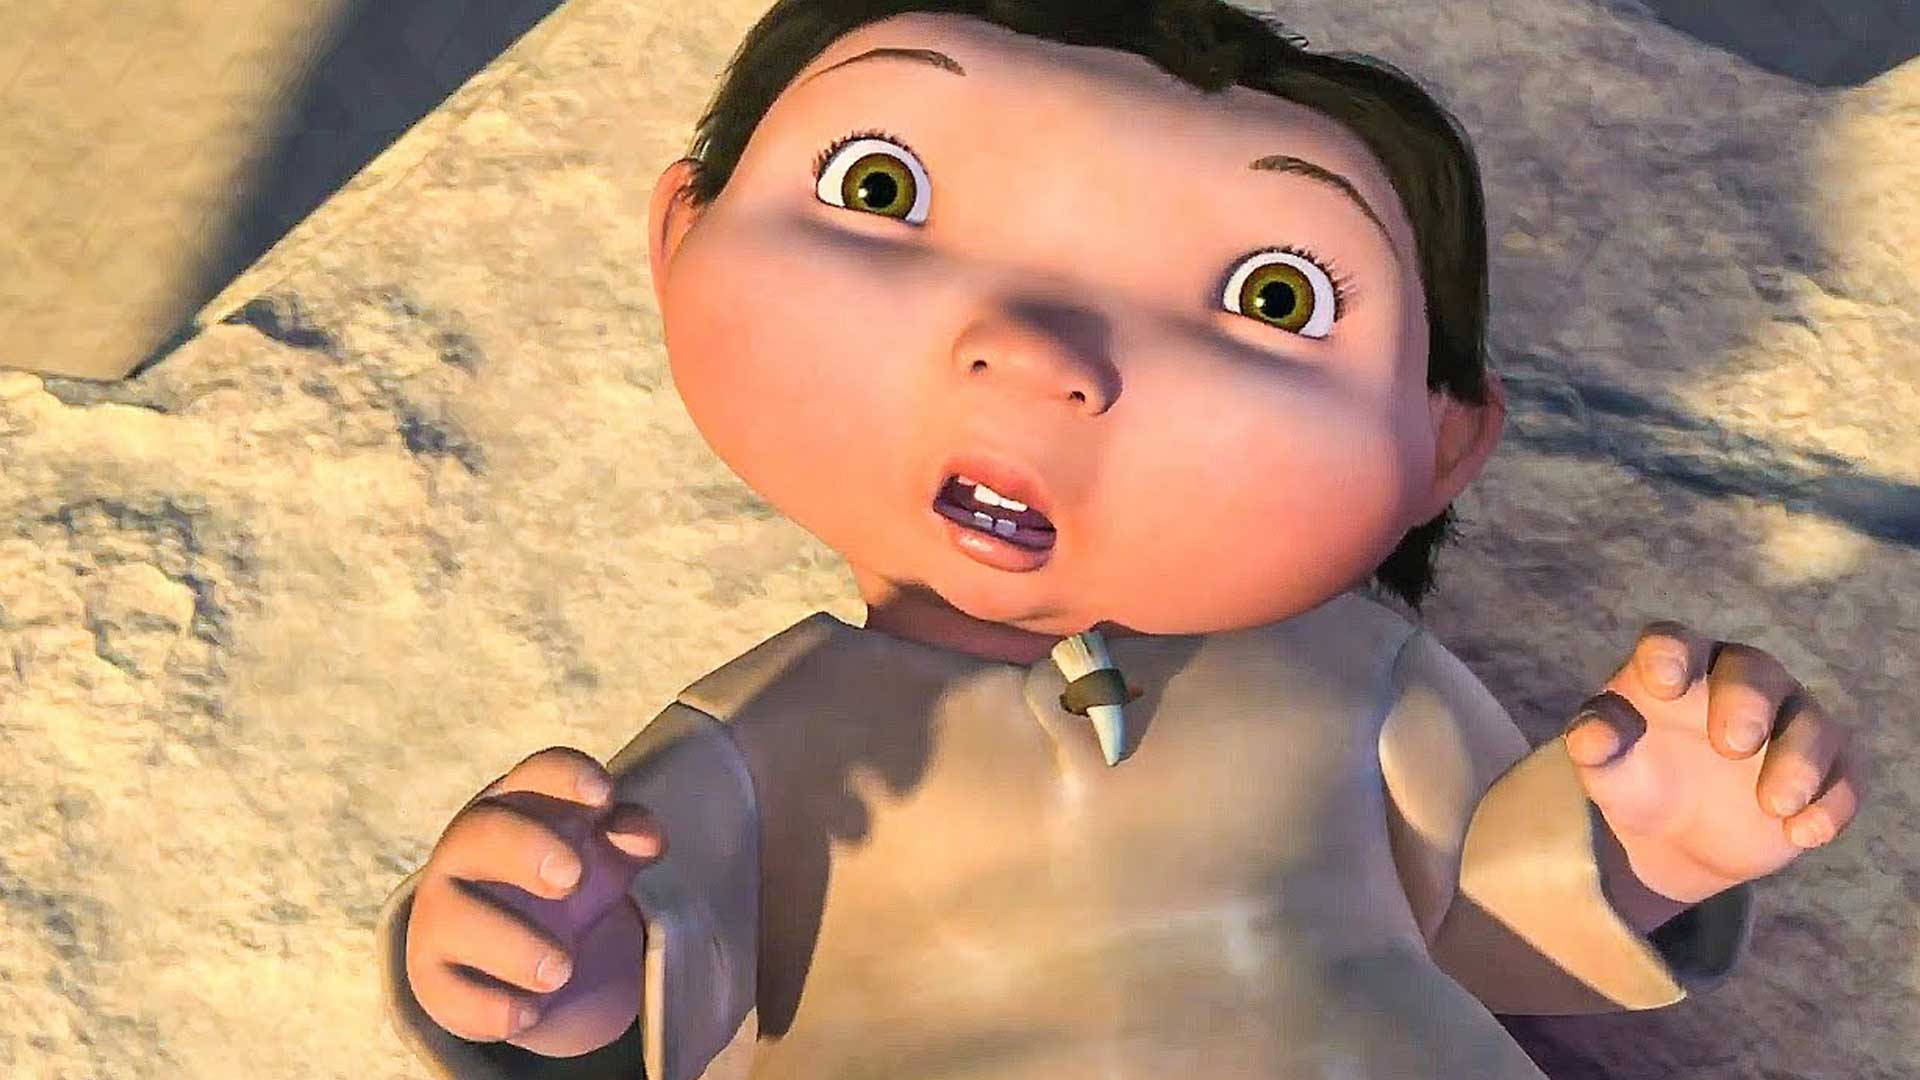 A baby in an Ice Age movie